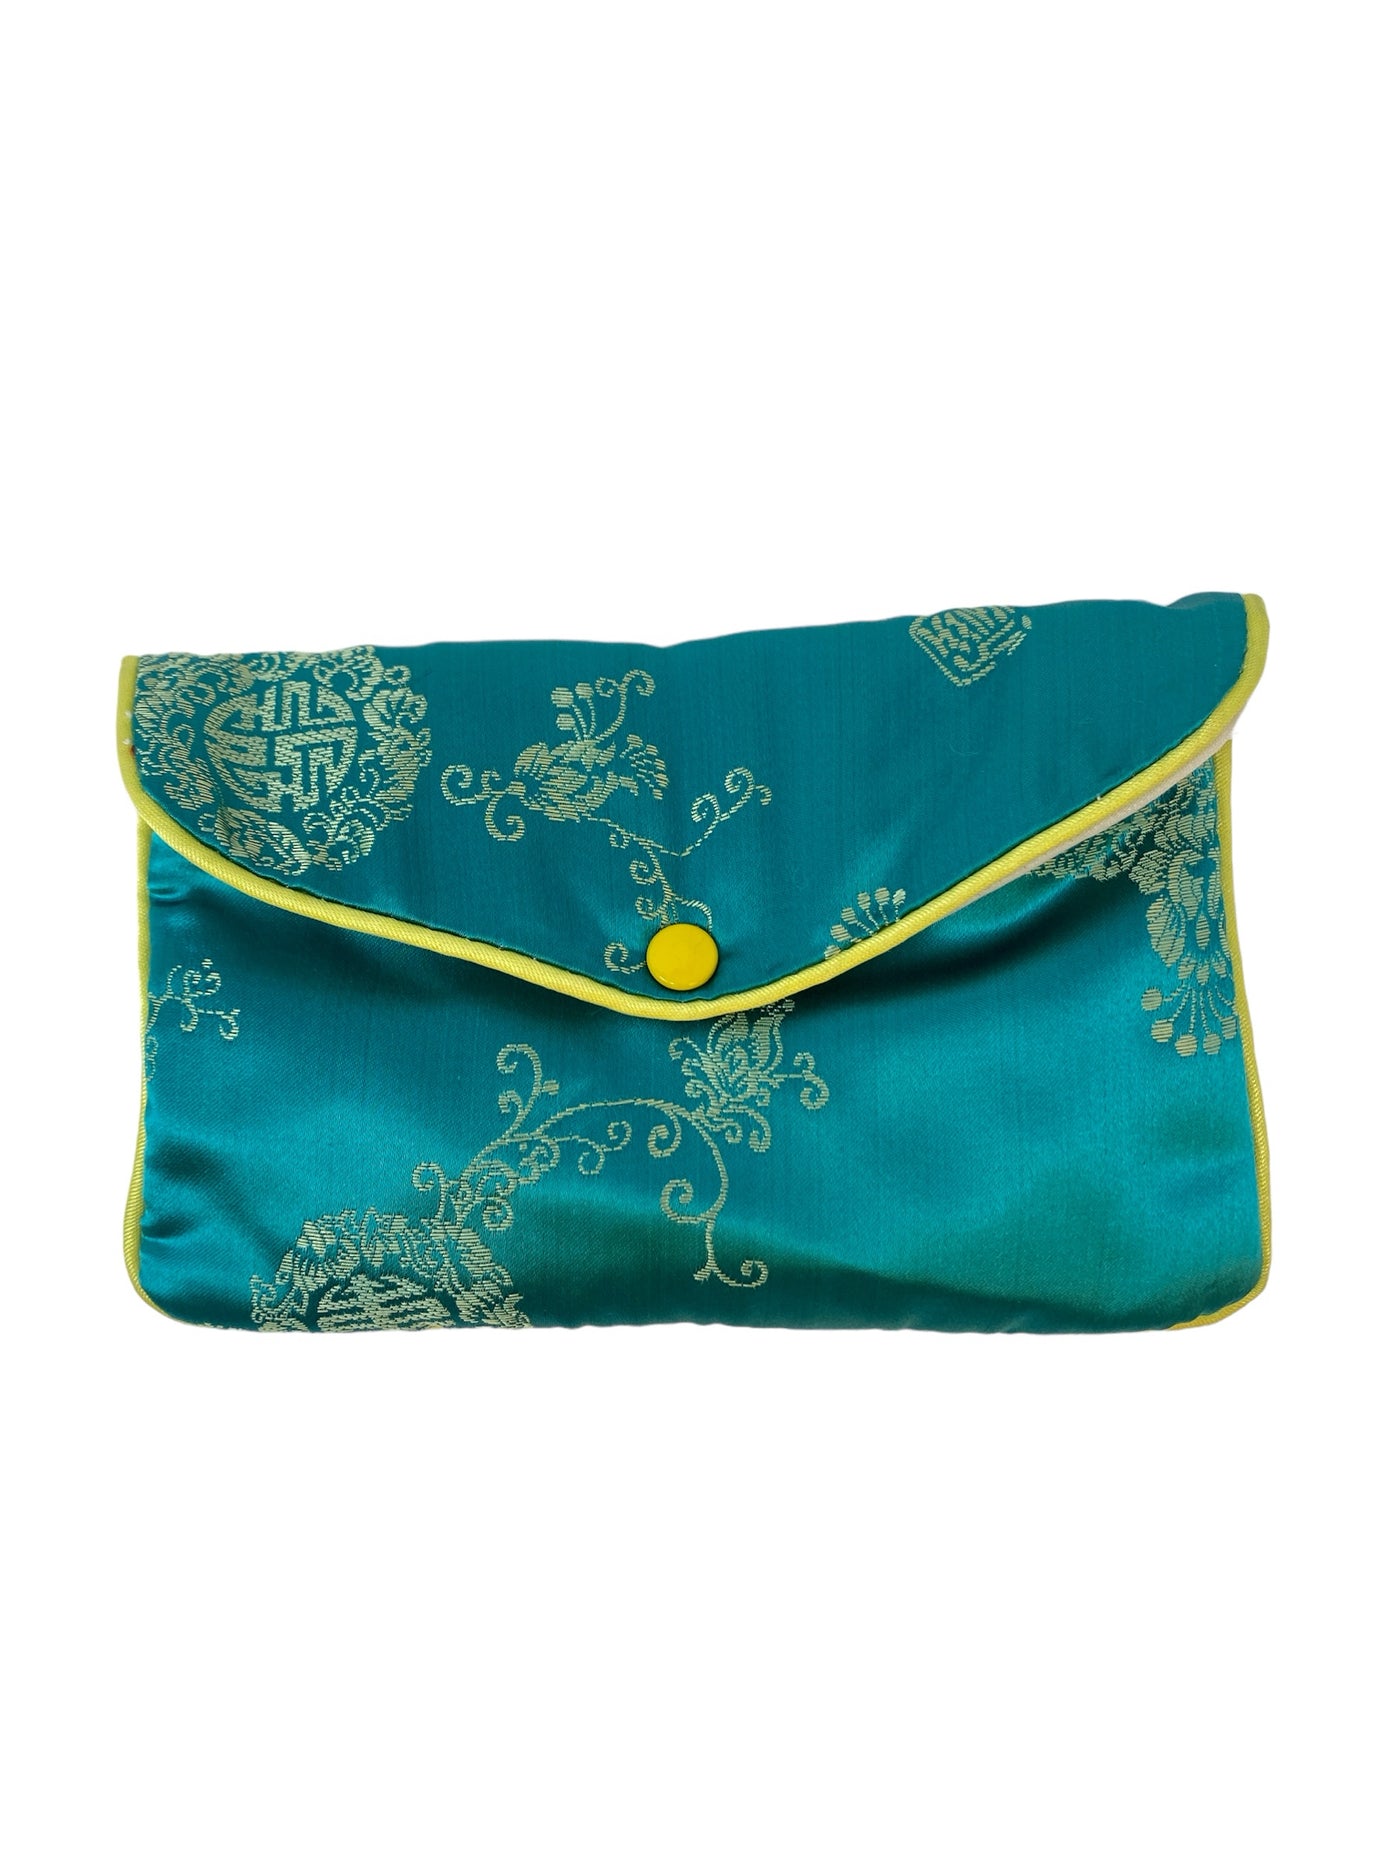 It's SO You Boutique Teal Print Clutch